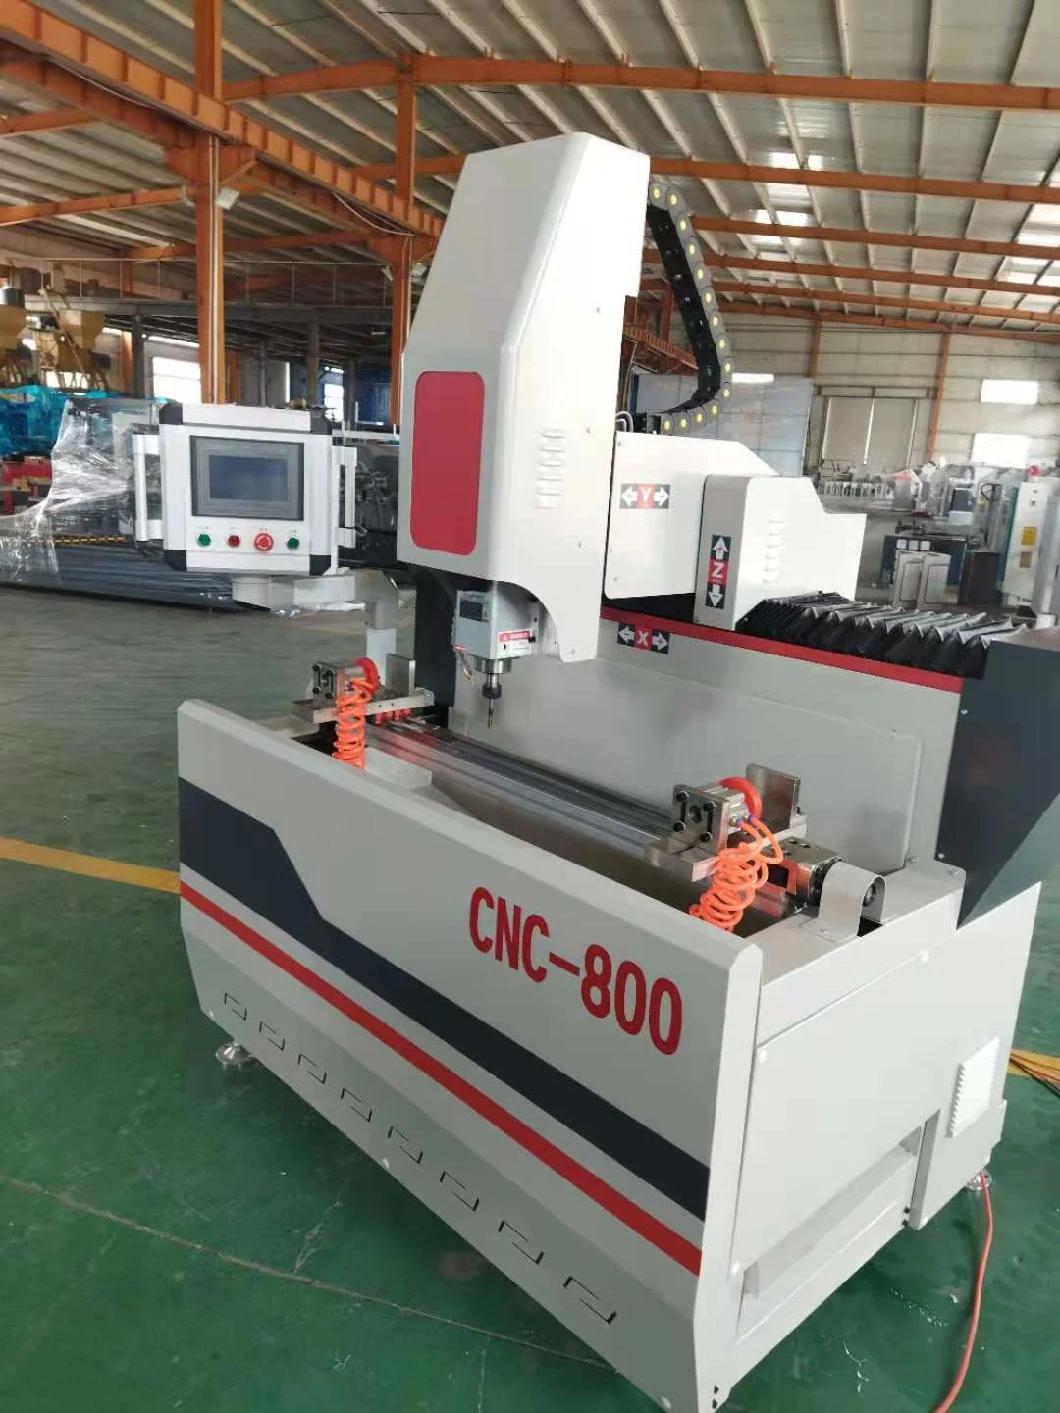 Lxf-CNC-800 CNC Drilling and Milling Machine for The Processing of Slot Holes of Curtain Wall Aluminum Alloy Profiles for Doors and Windows Making